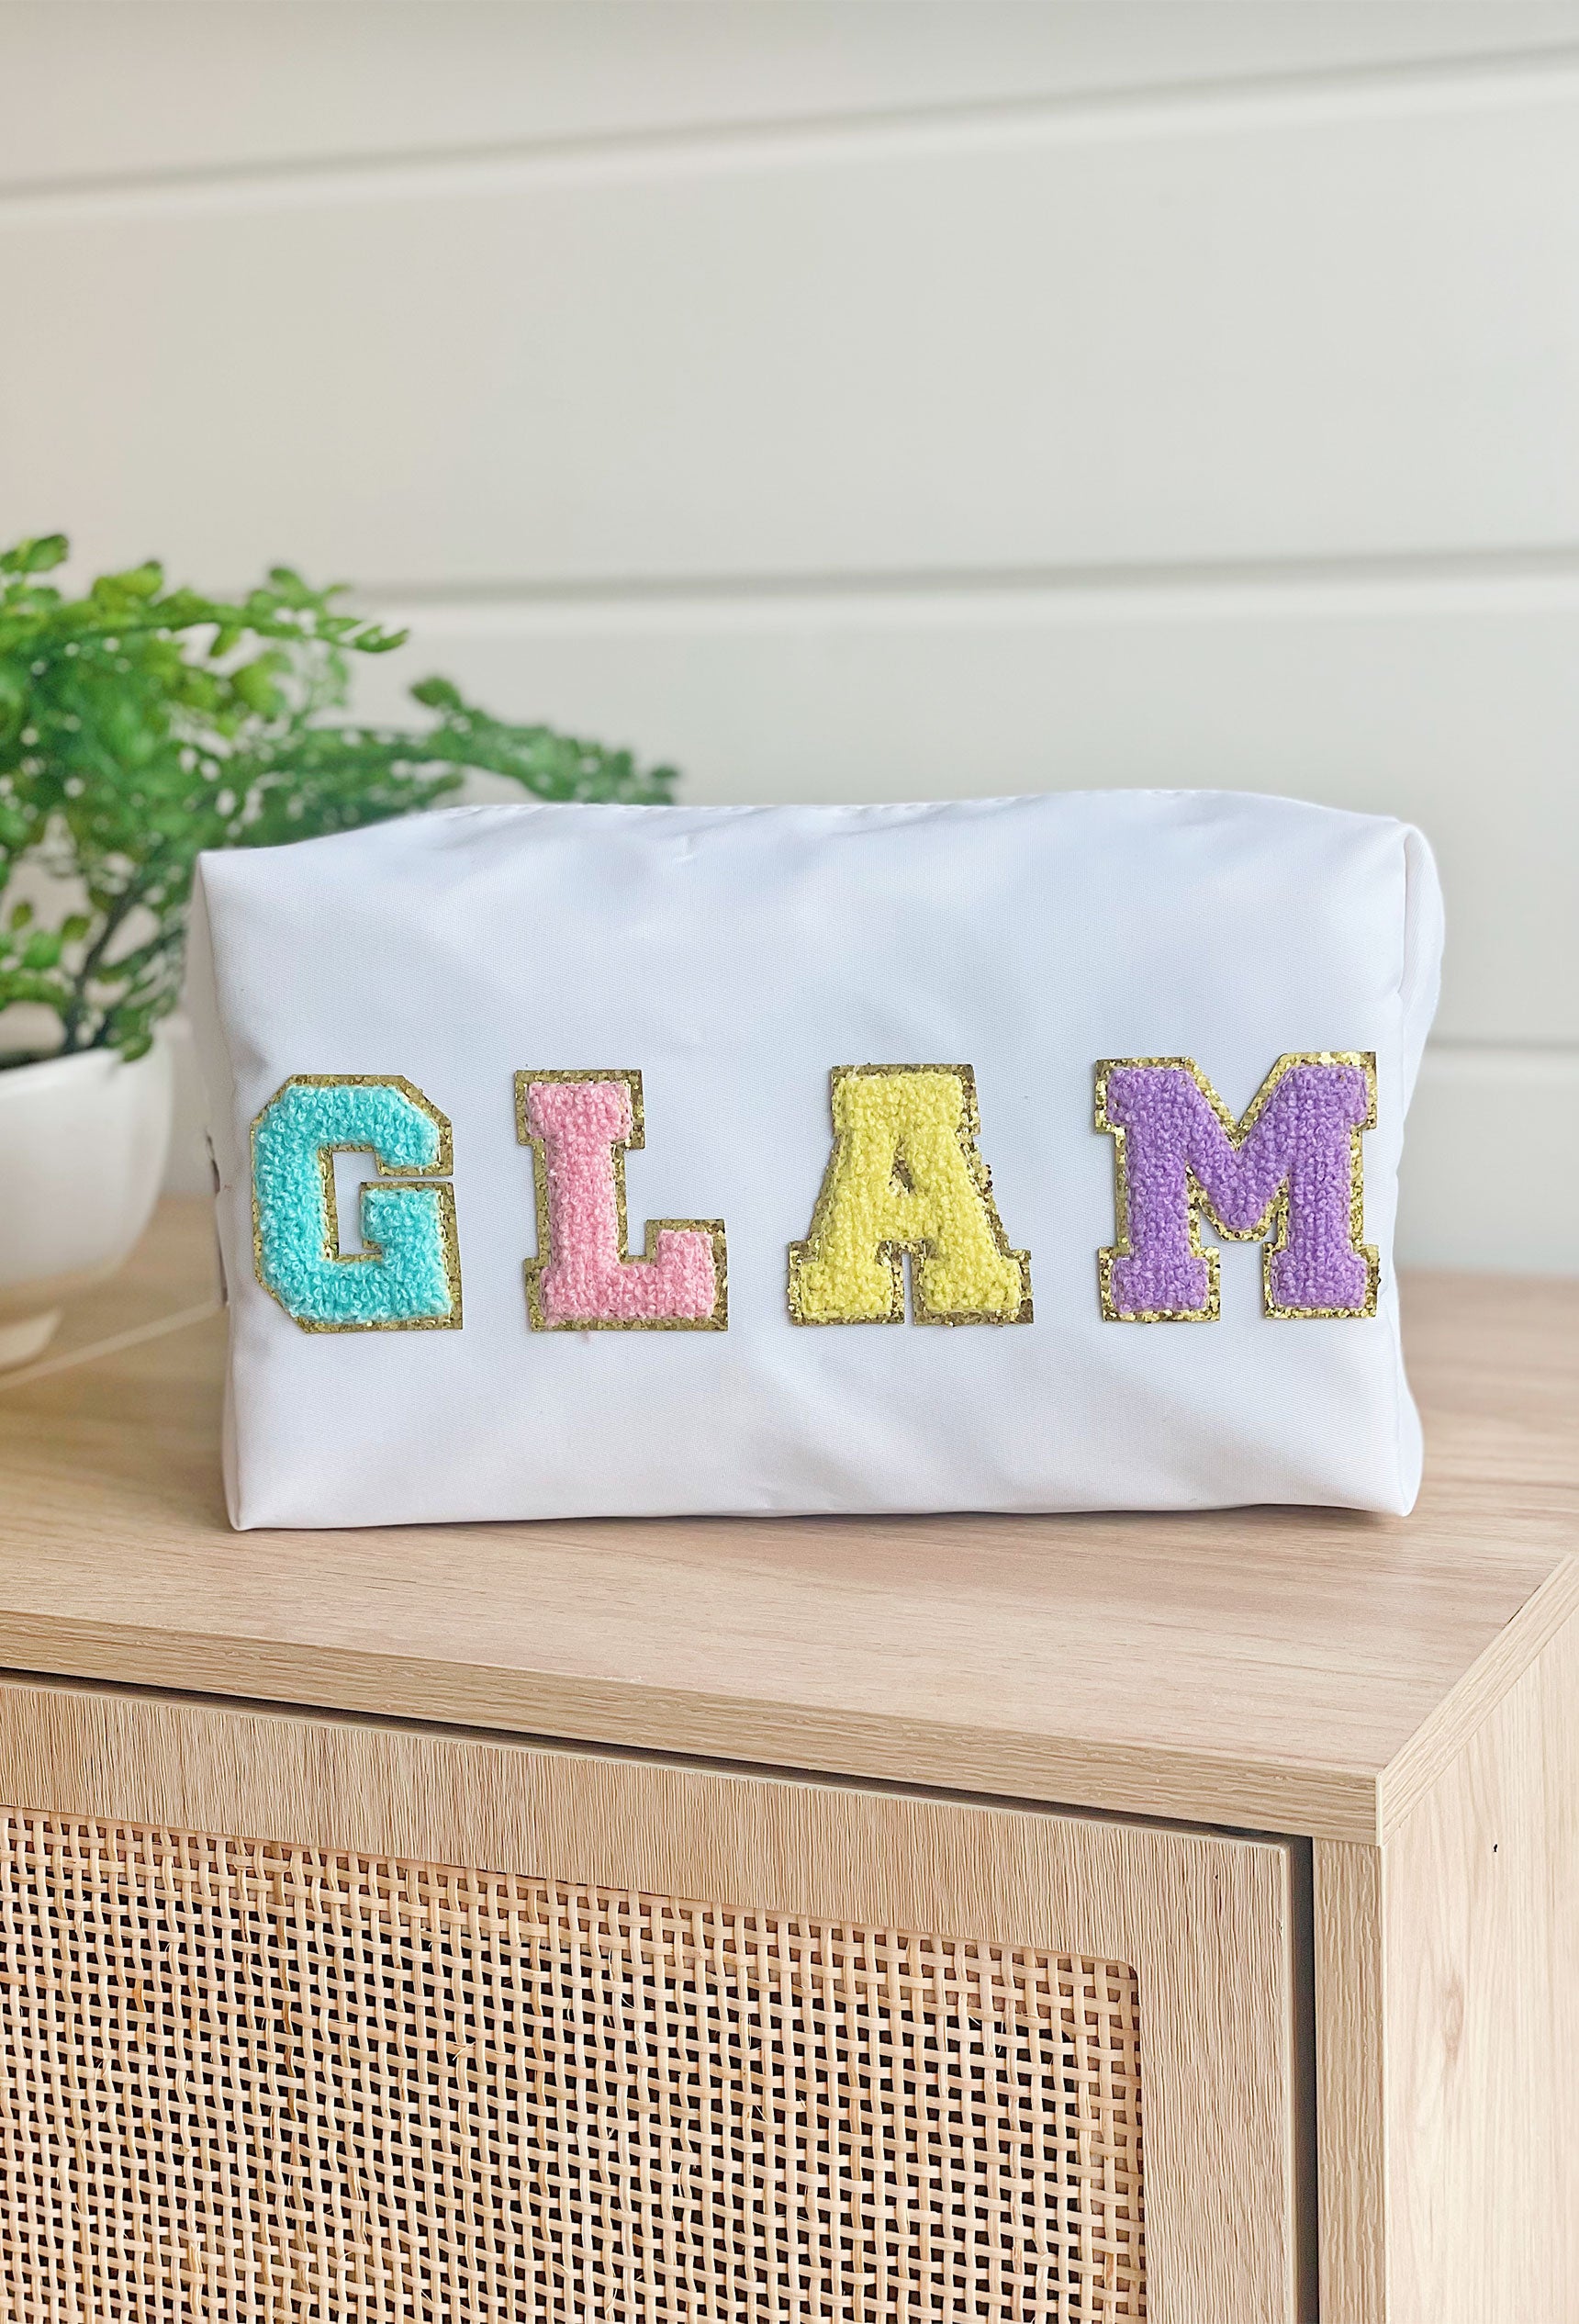 Glam Cosmetic Bag in White, White nylon cosmetic bag with "glam" printed in a colorful textured font